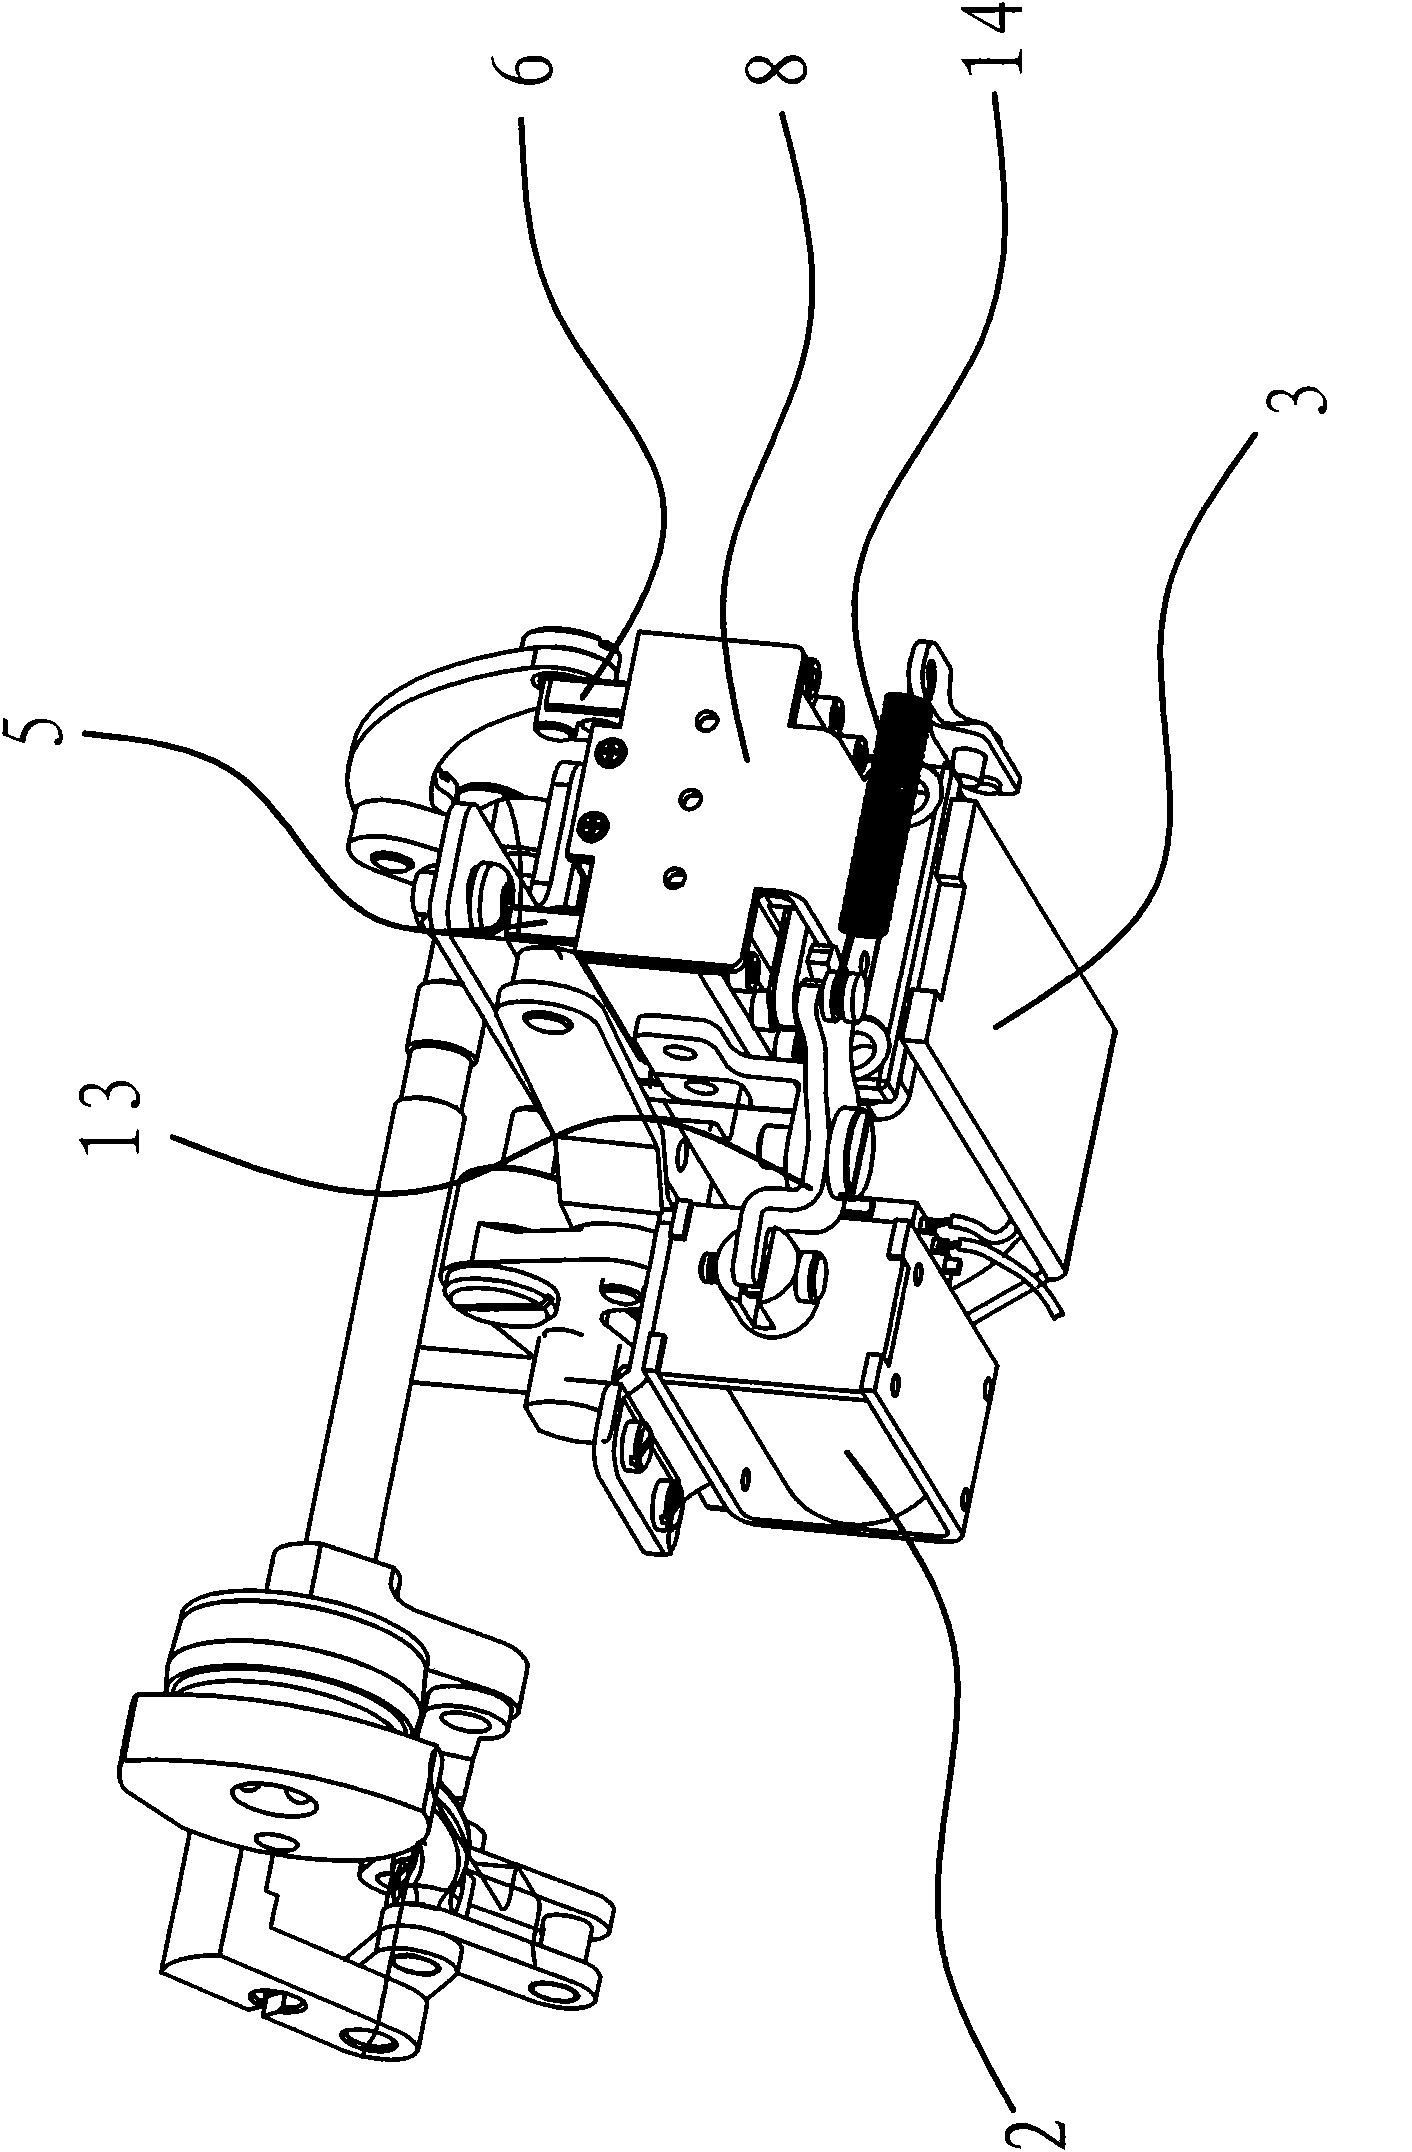 Pressure foot lifting and inverted material feeding device of sewing machine